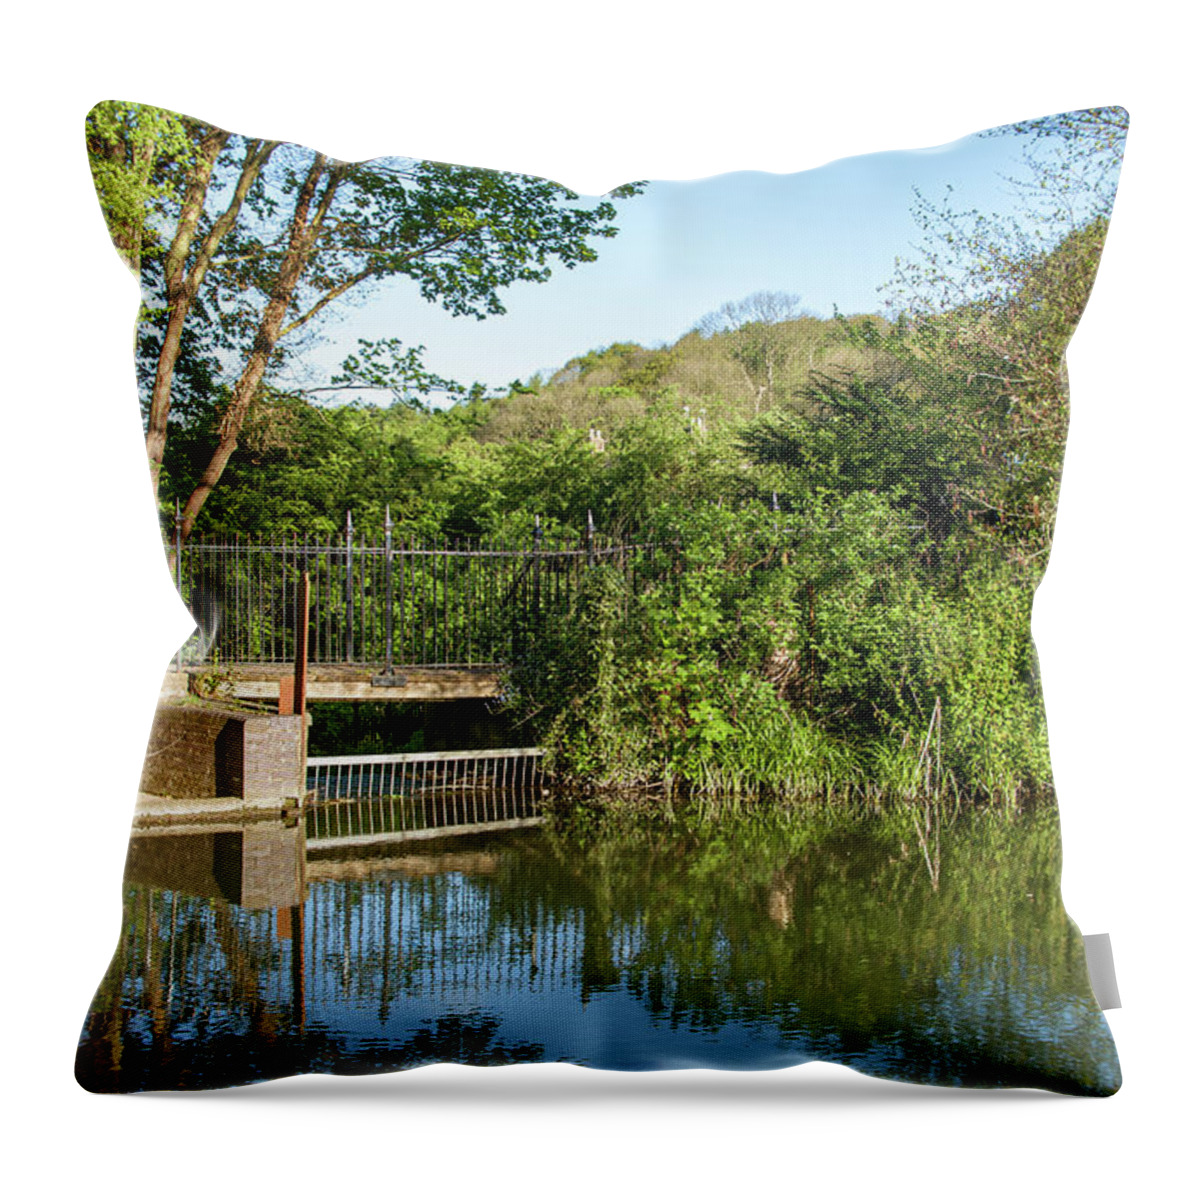 Sluice Throw Pillow featuring the photograph Sluice gate on a tranquil pool by Average Images